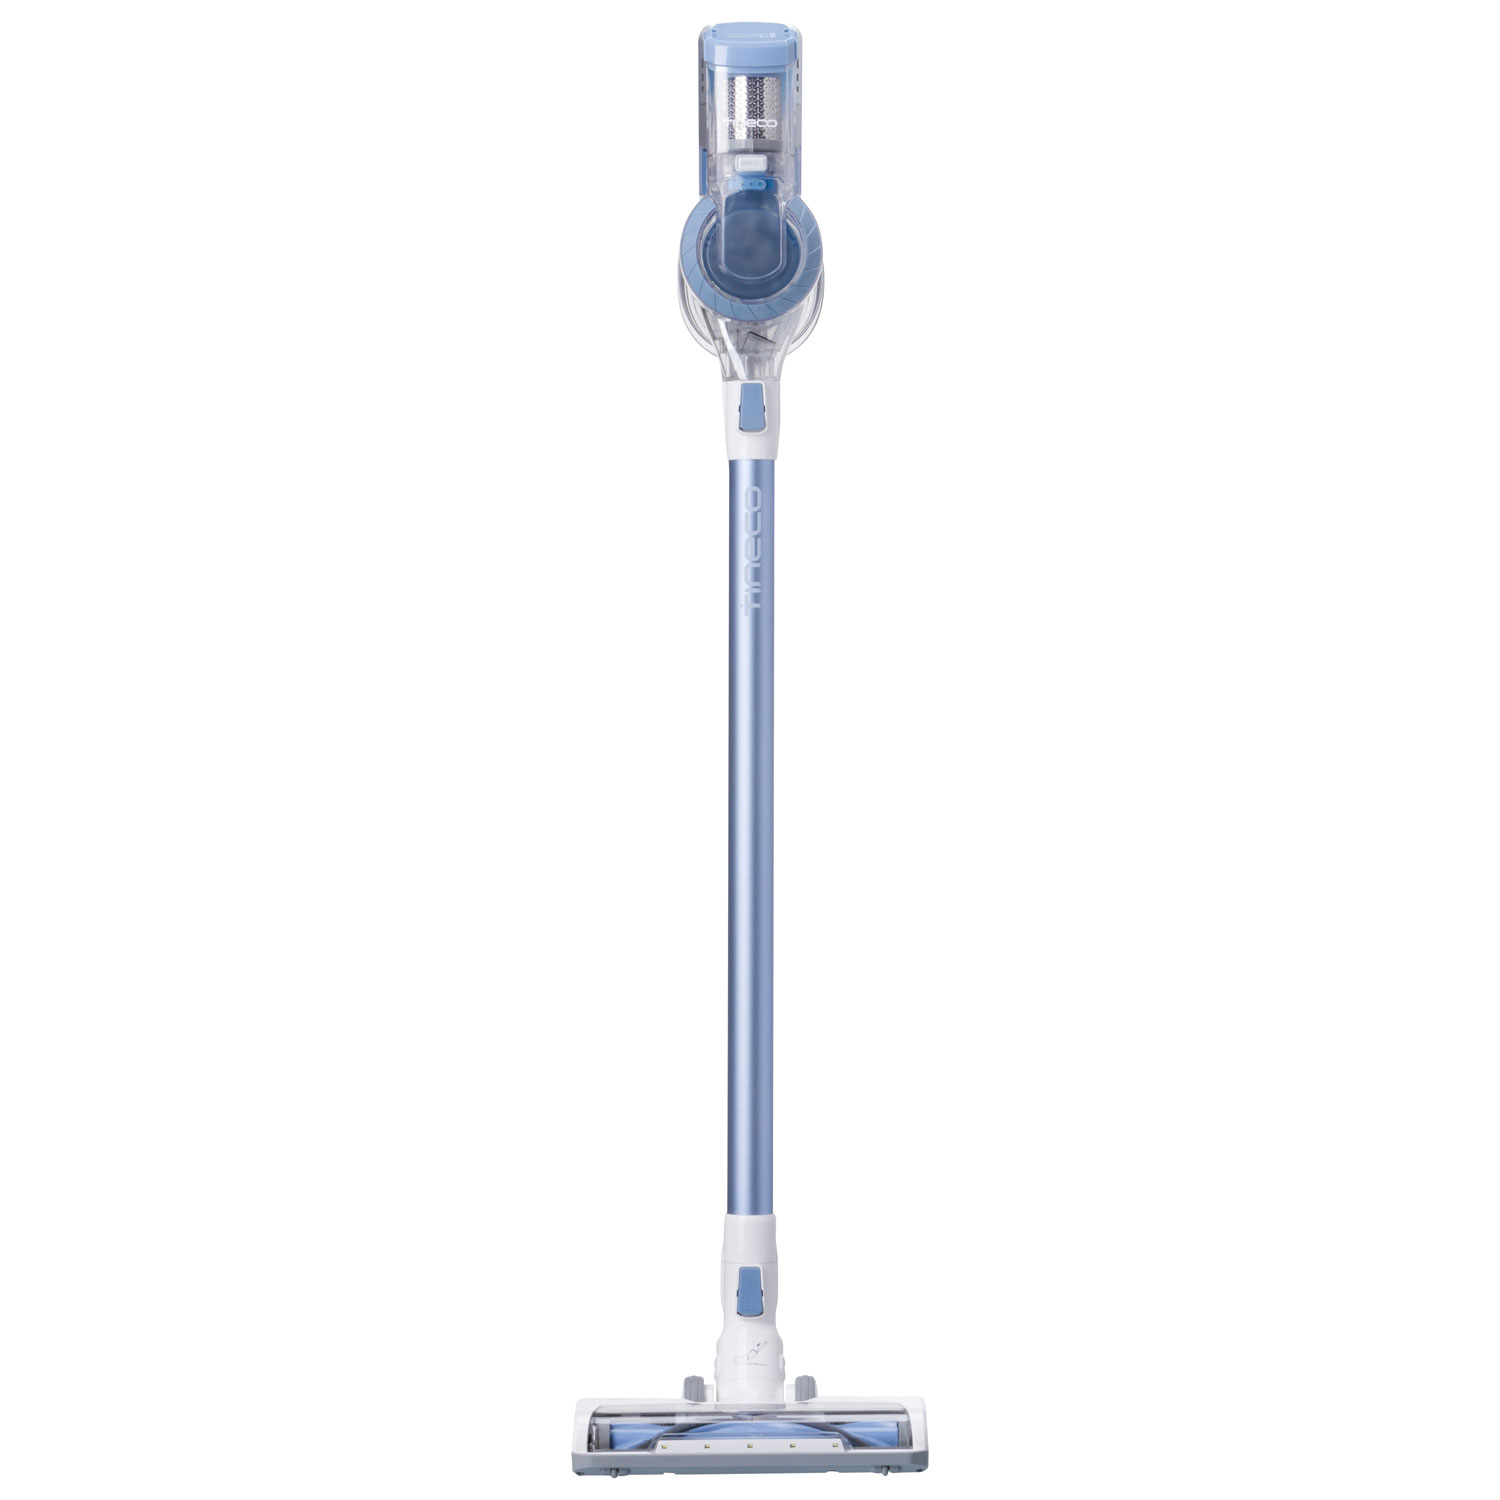 Tineco C3 Powerful Cordless Stick Vacuum Cleaner with Extra Battery - Blue